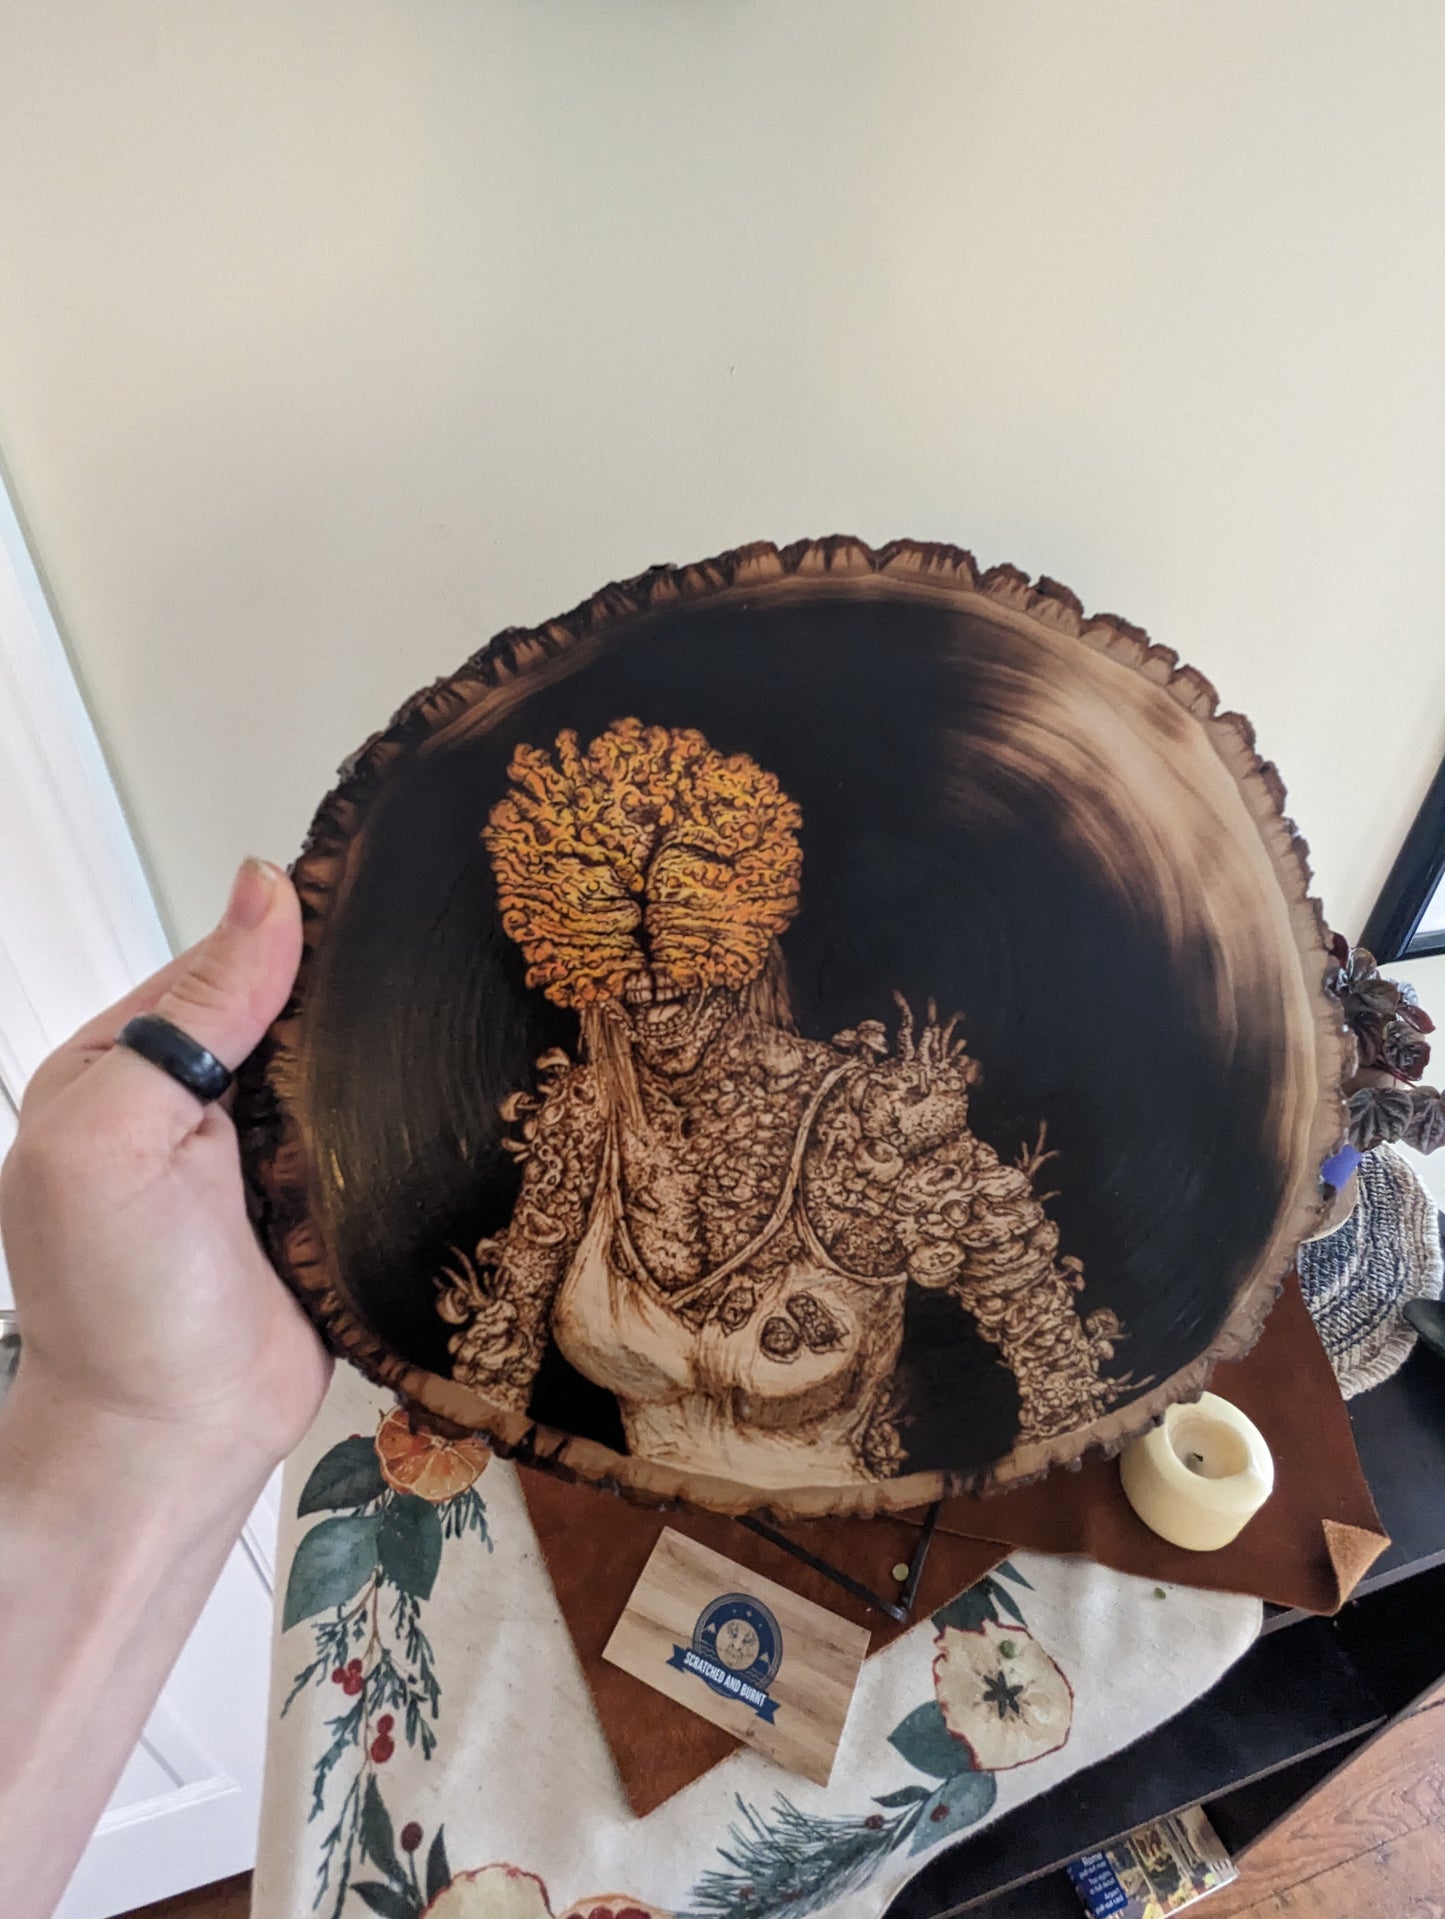 Clicker "The Last of Us" Pyrography Desk/Wall Art